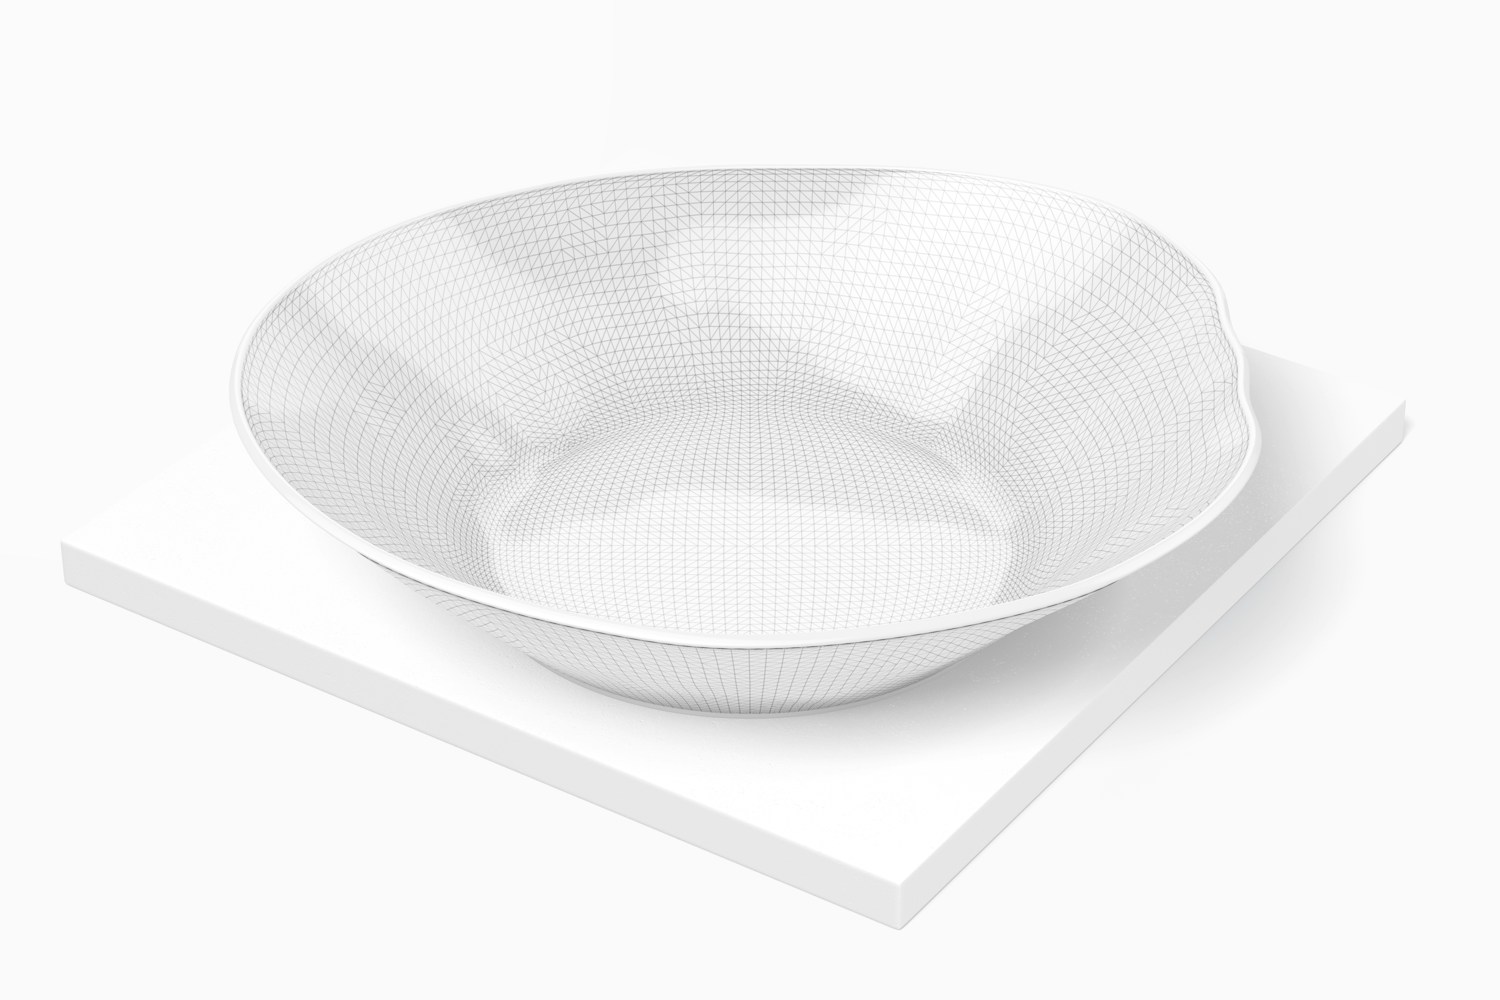 Irregular Shaped Plate Mockup, Perspective View